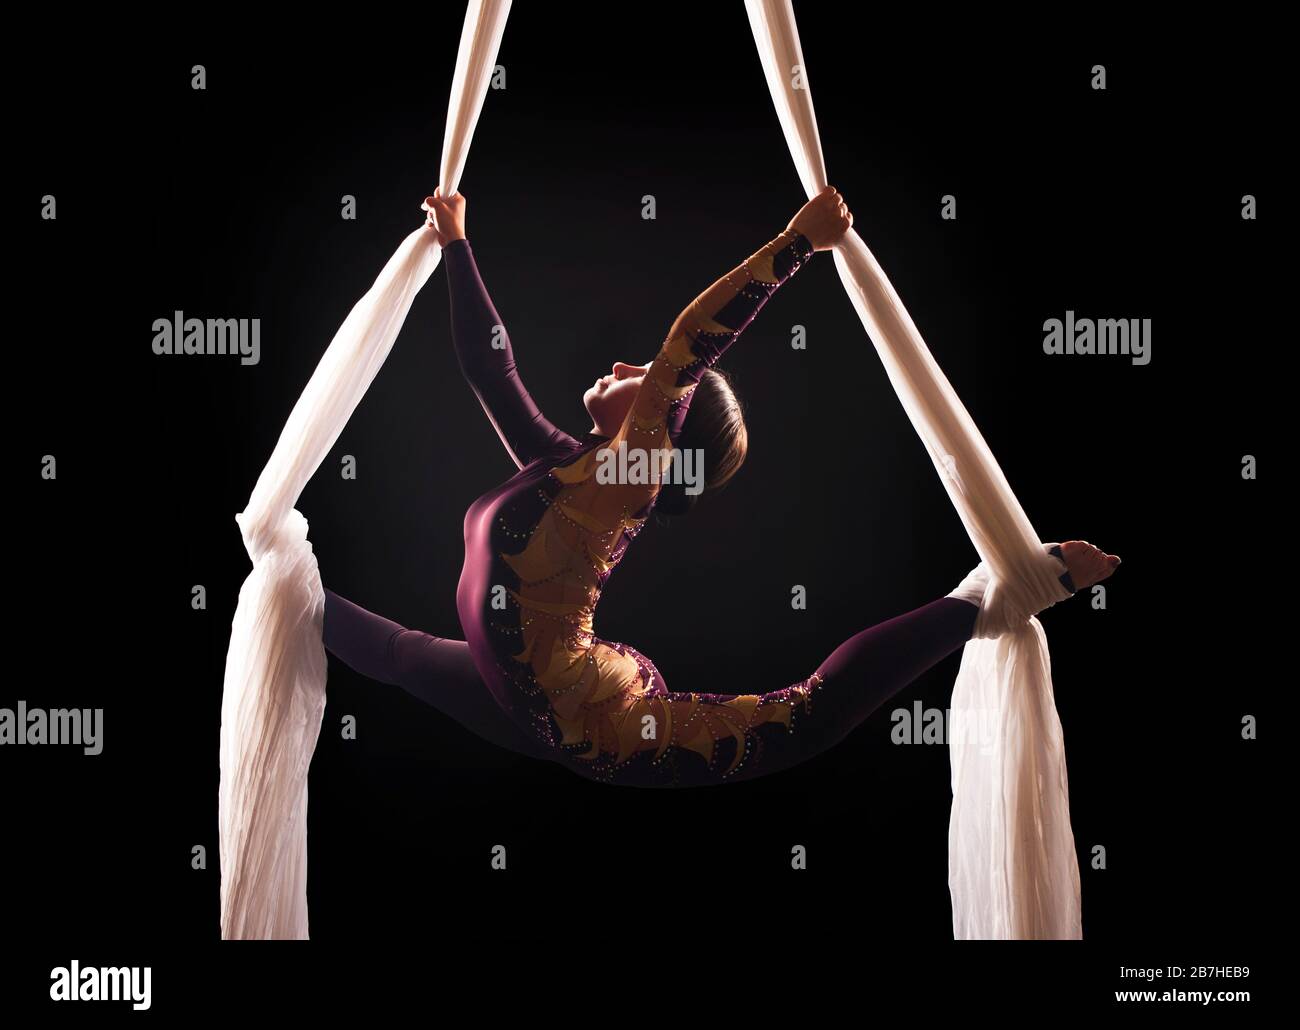 Sporty woman in a Burgundy suit  performs gymnastic and circus exercises on white silk, in the contra light. Studio shooting on a dark background. Stock Photo